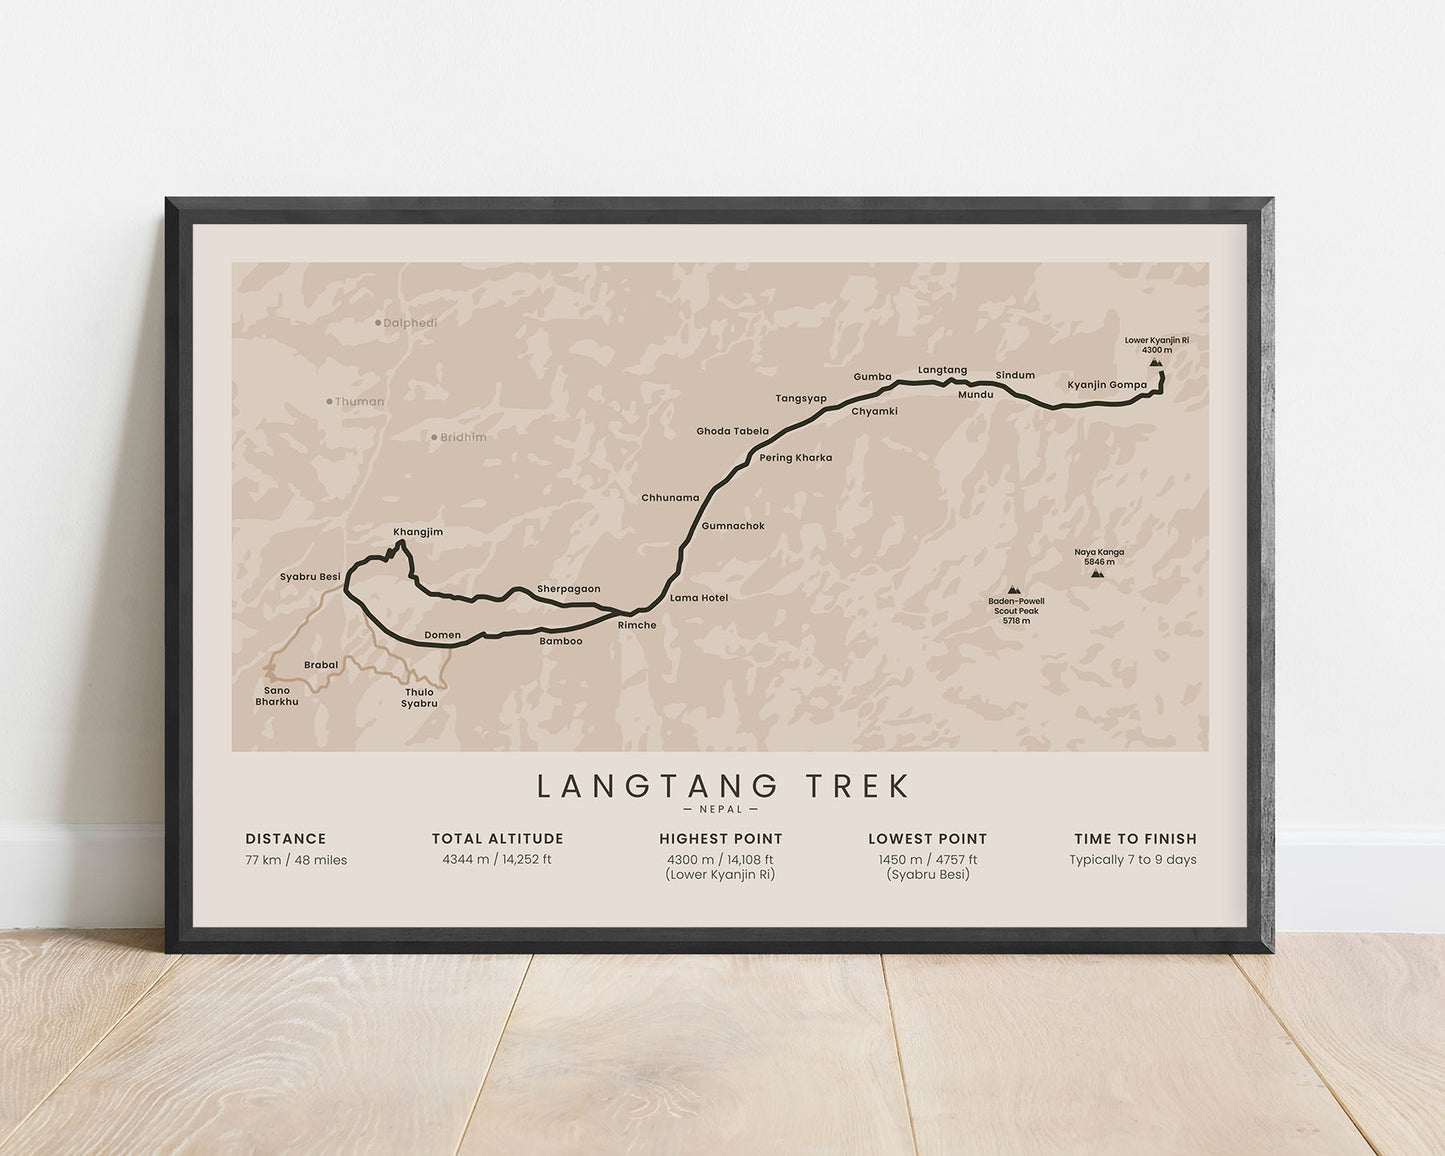 Langtang Trek (Nepal, Himalayas) route wall map with beige background